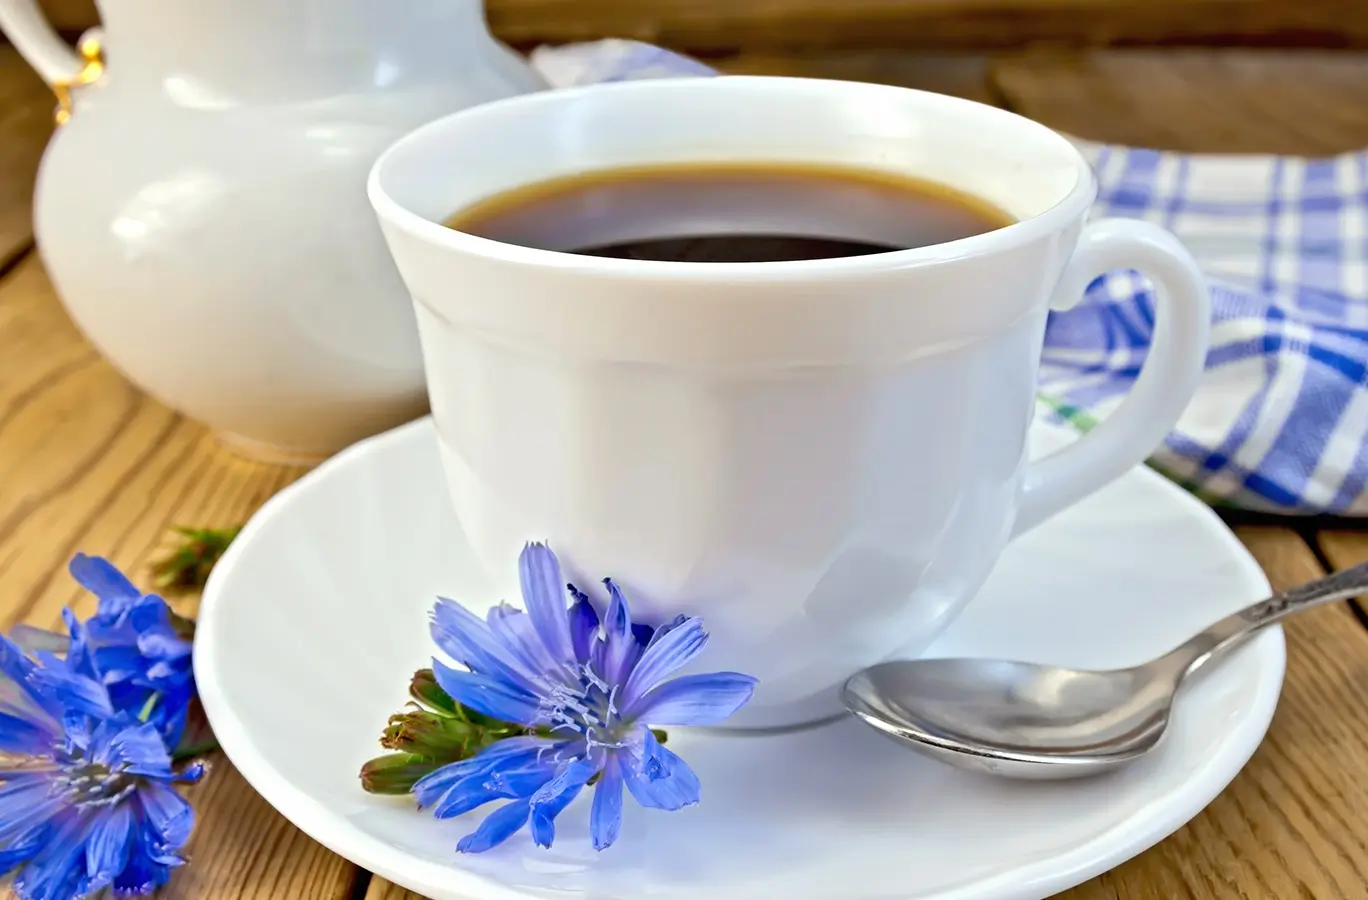 Chicory (Cichorium intybus L.) is used as an adulterant or substitute for coffee or tea